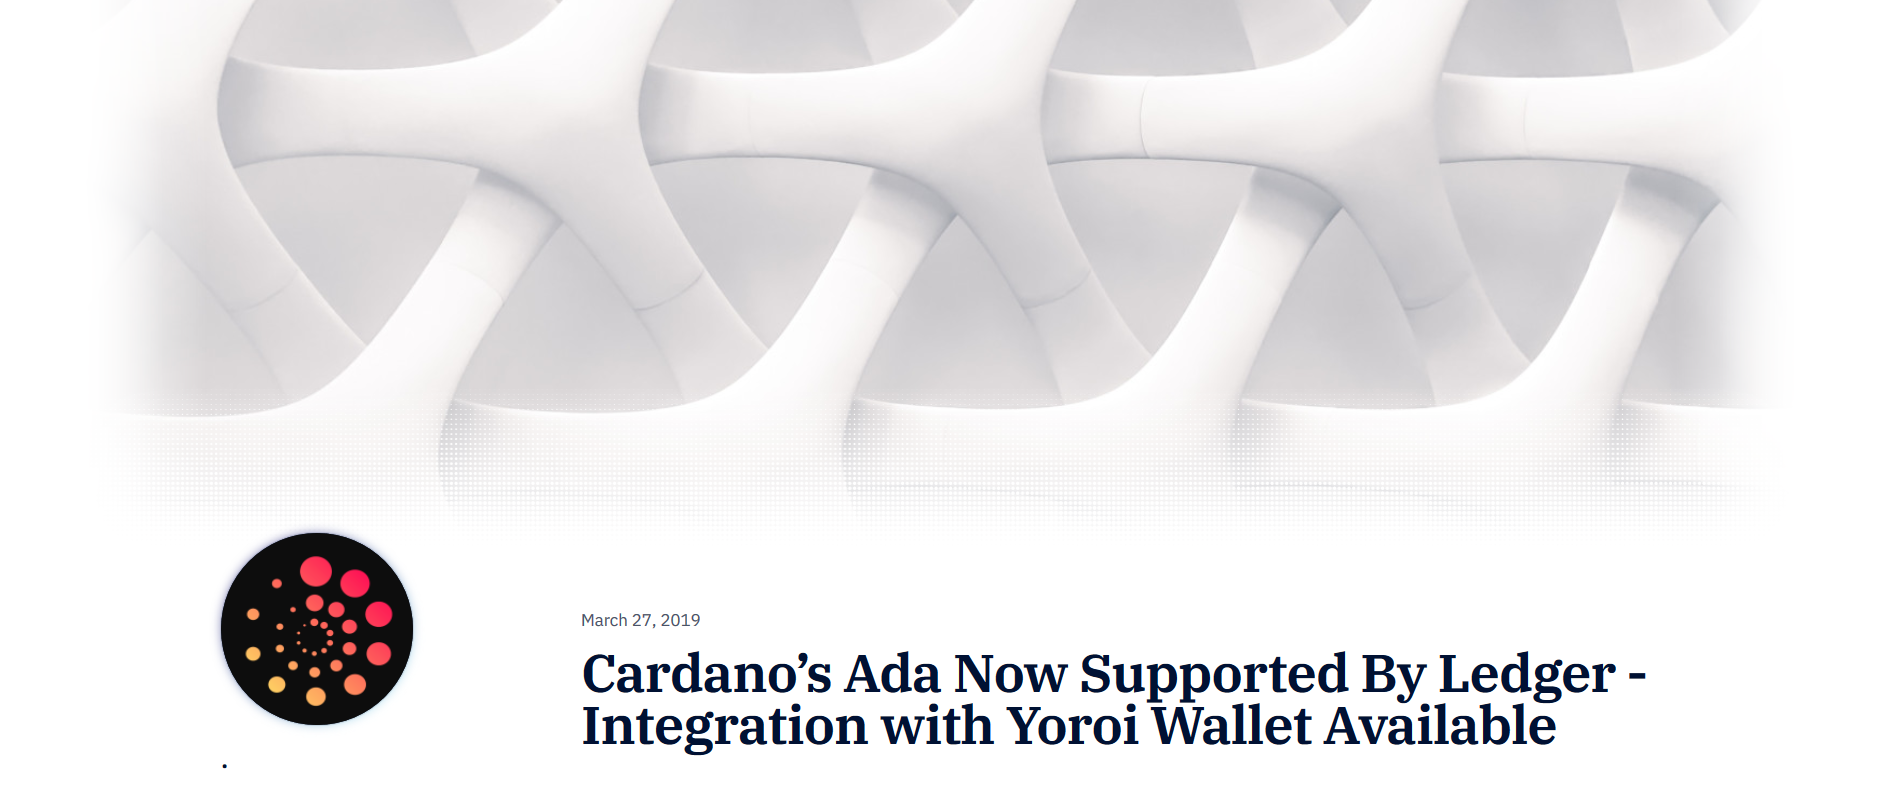 Cardano’s Ada Now Supported By Ledger - Integration with Yoroi Wallet Available